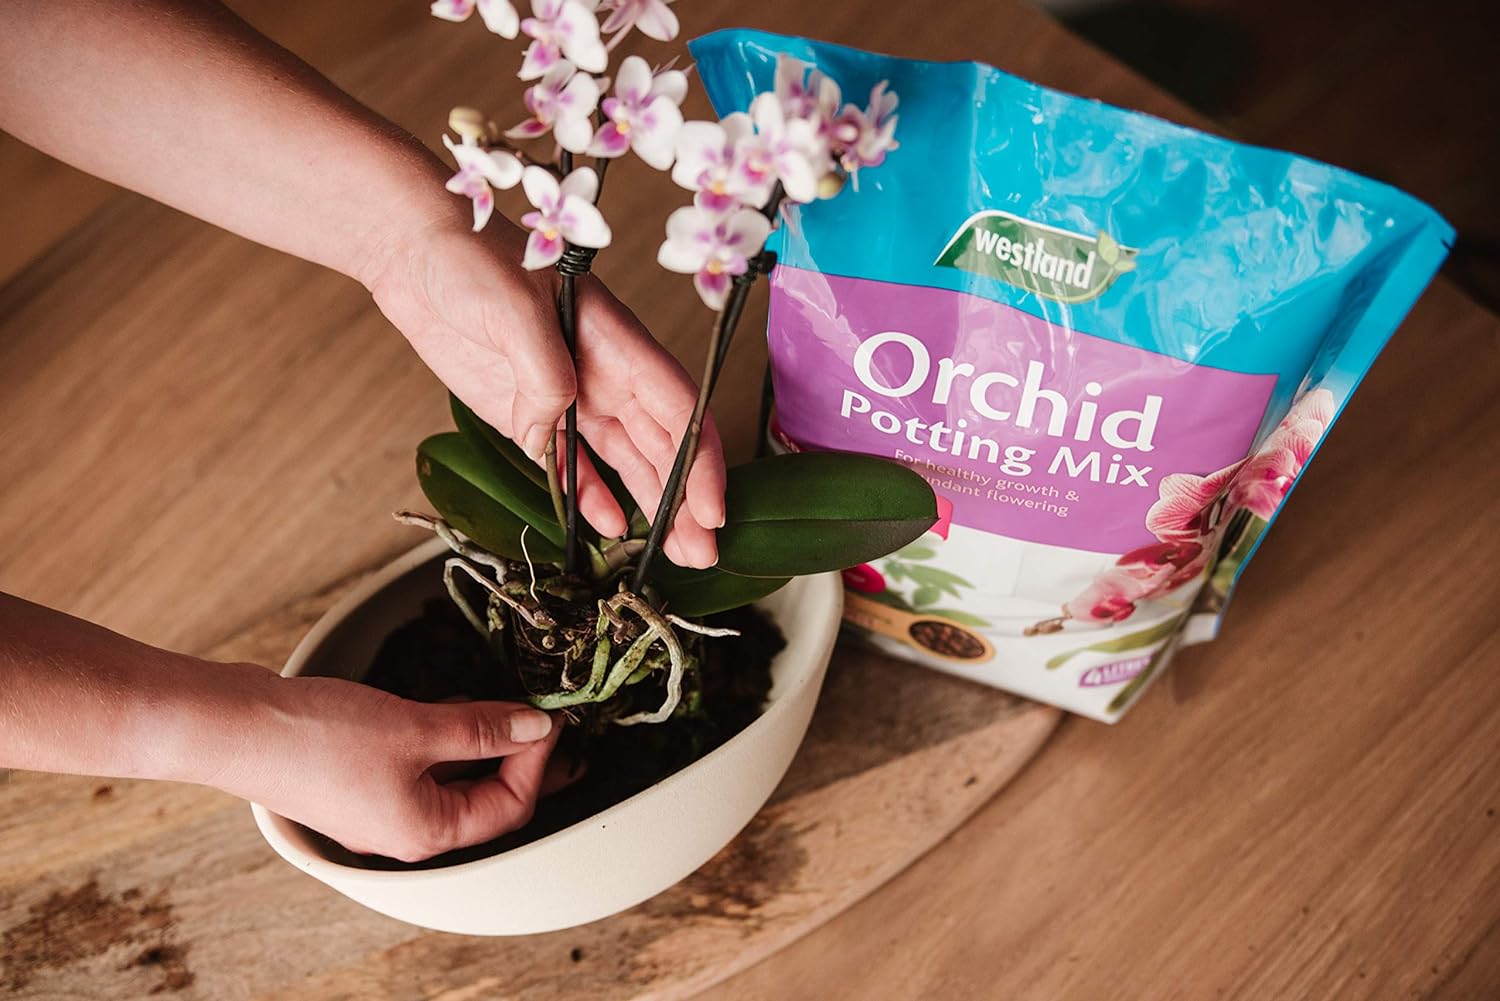 Westland Orchid Potting Compost Mix and Enriched with Seramis, 4 L :Garden